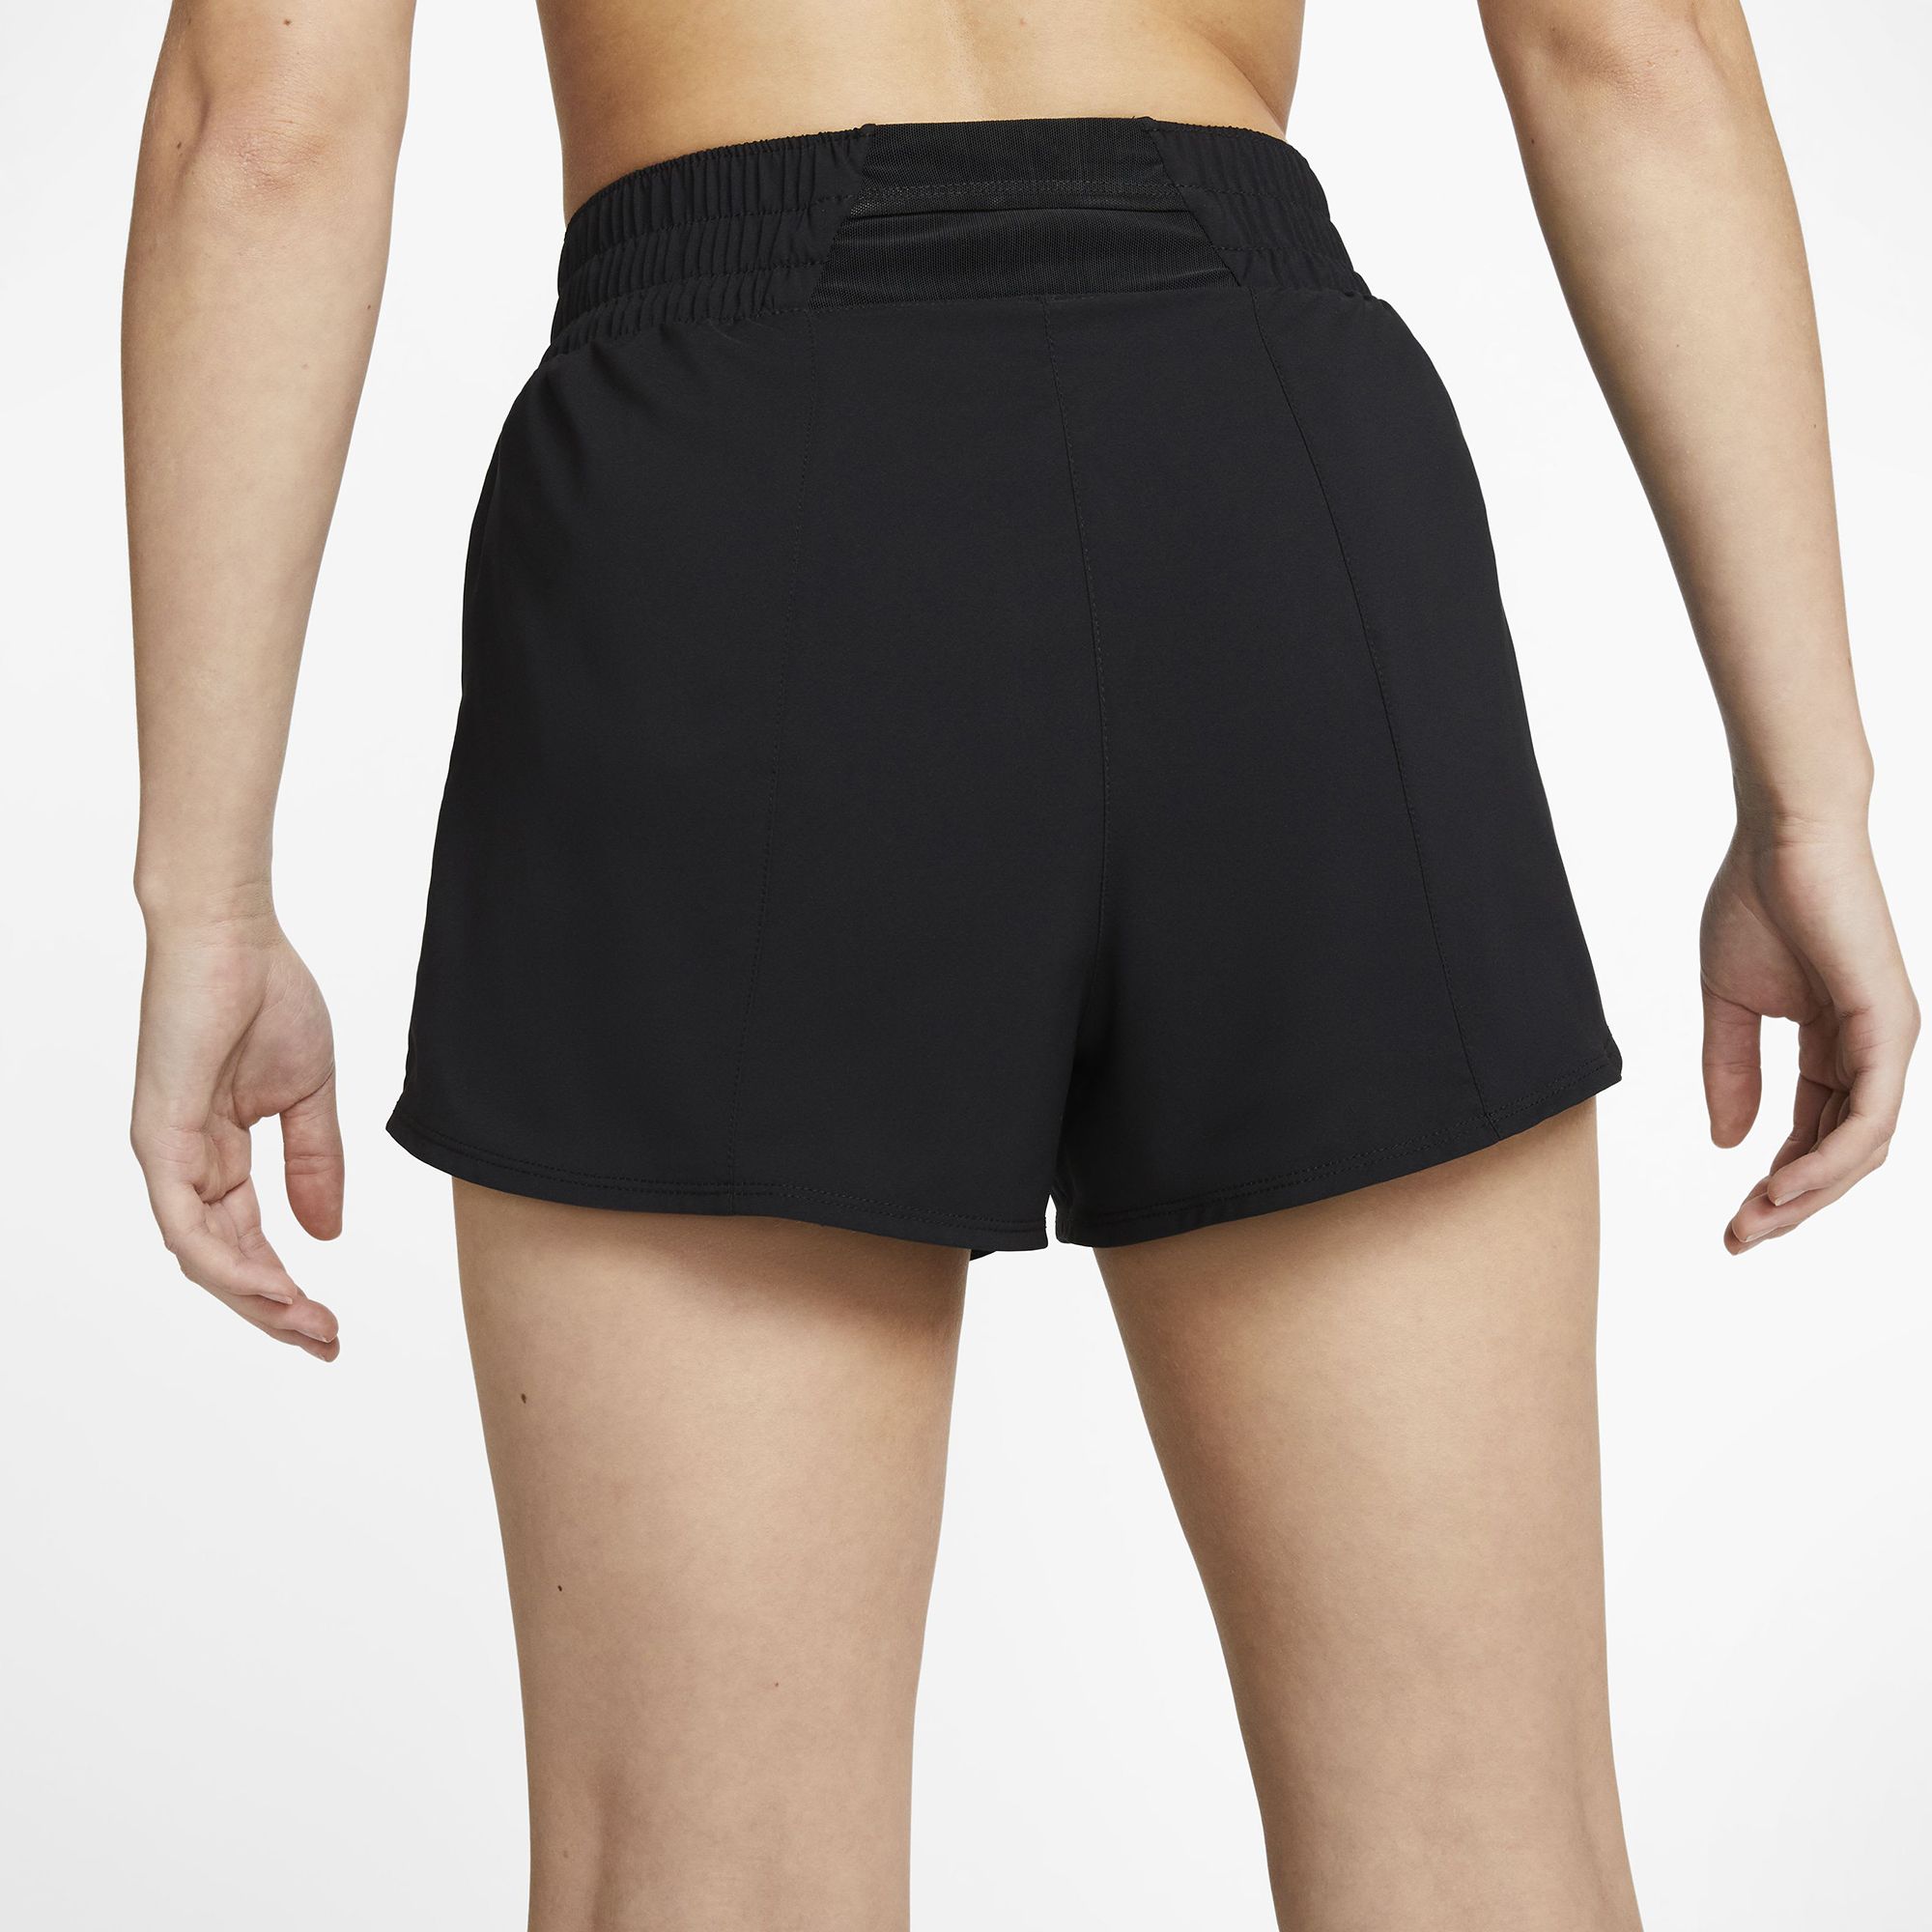 Nike One Women's Dri-FIT High-Waisted 3 Brief-Lined Shorts.